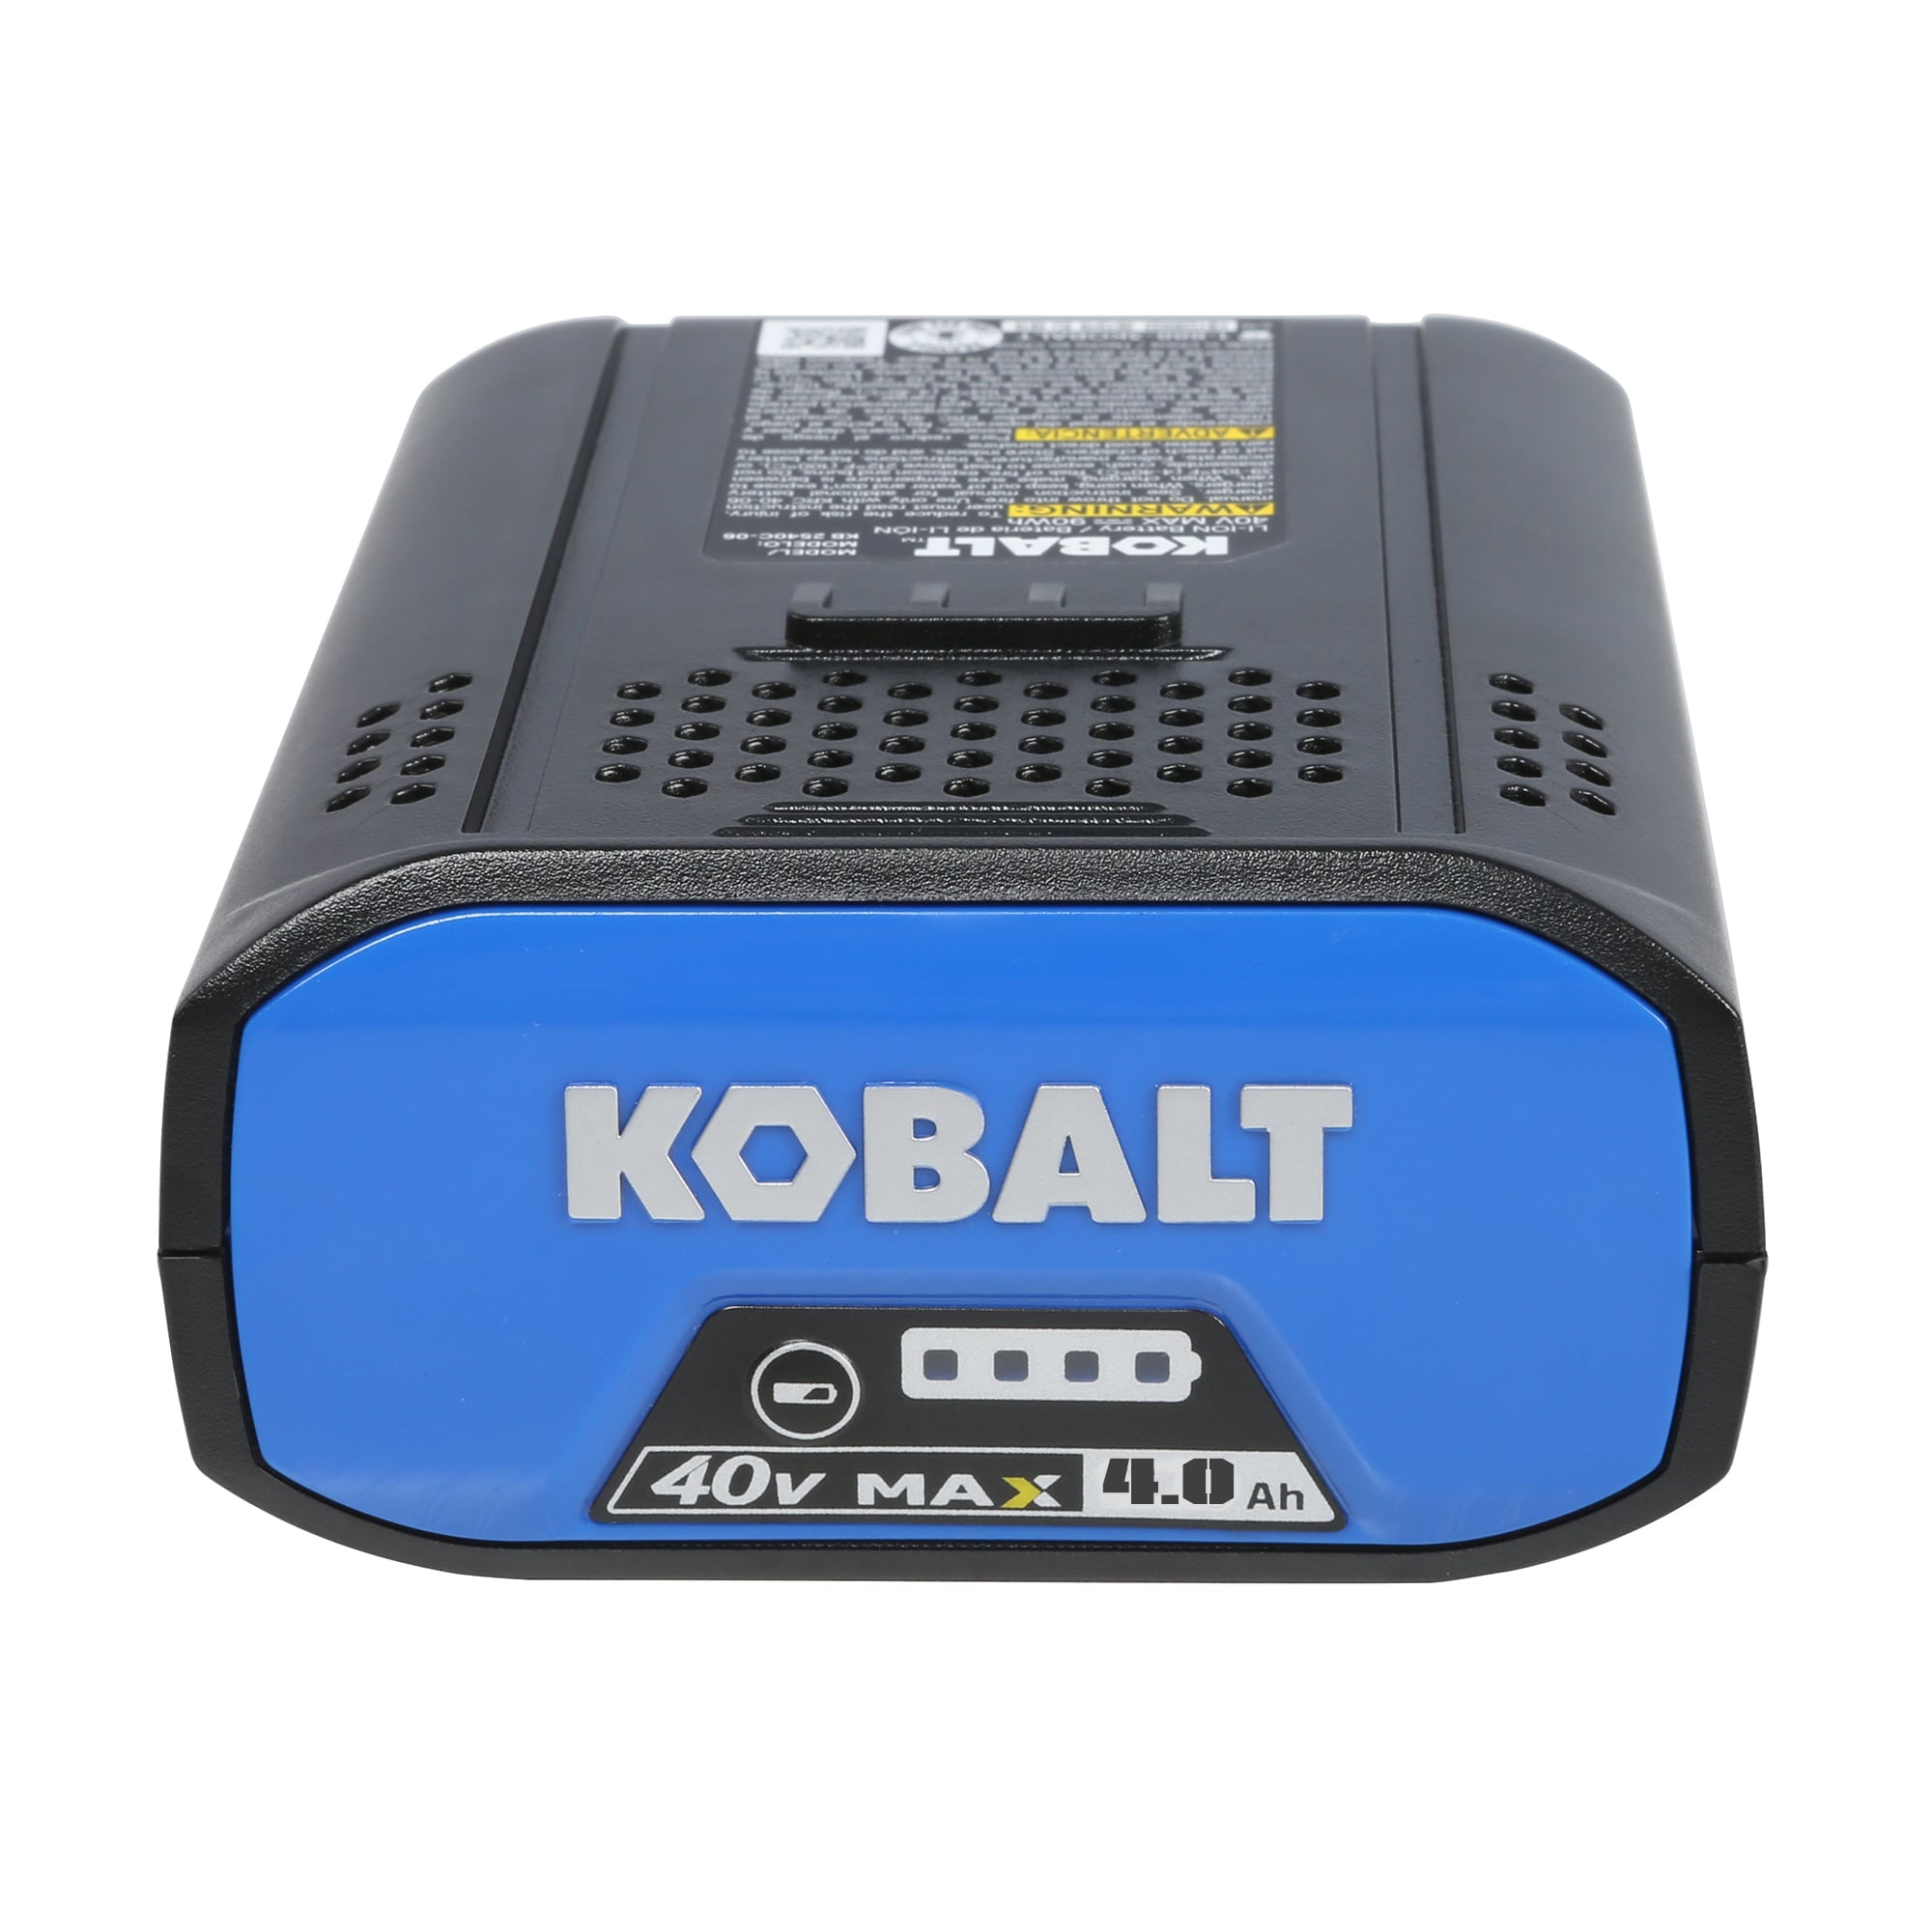 Kobalt 40-Volt Max 4 Ah Rechargeable Lithium Ion (Li-ion) Cordless Power  Equipment Battery at